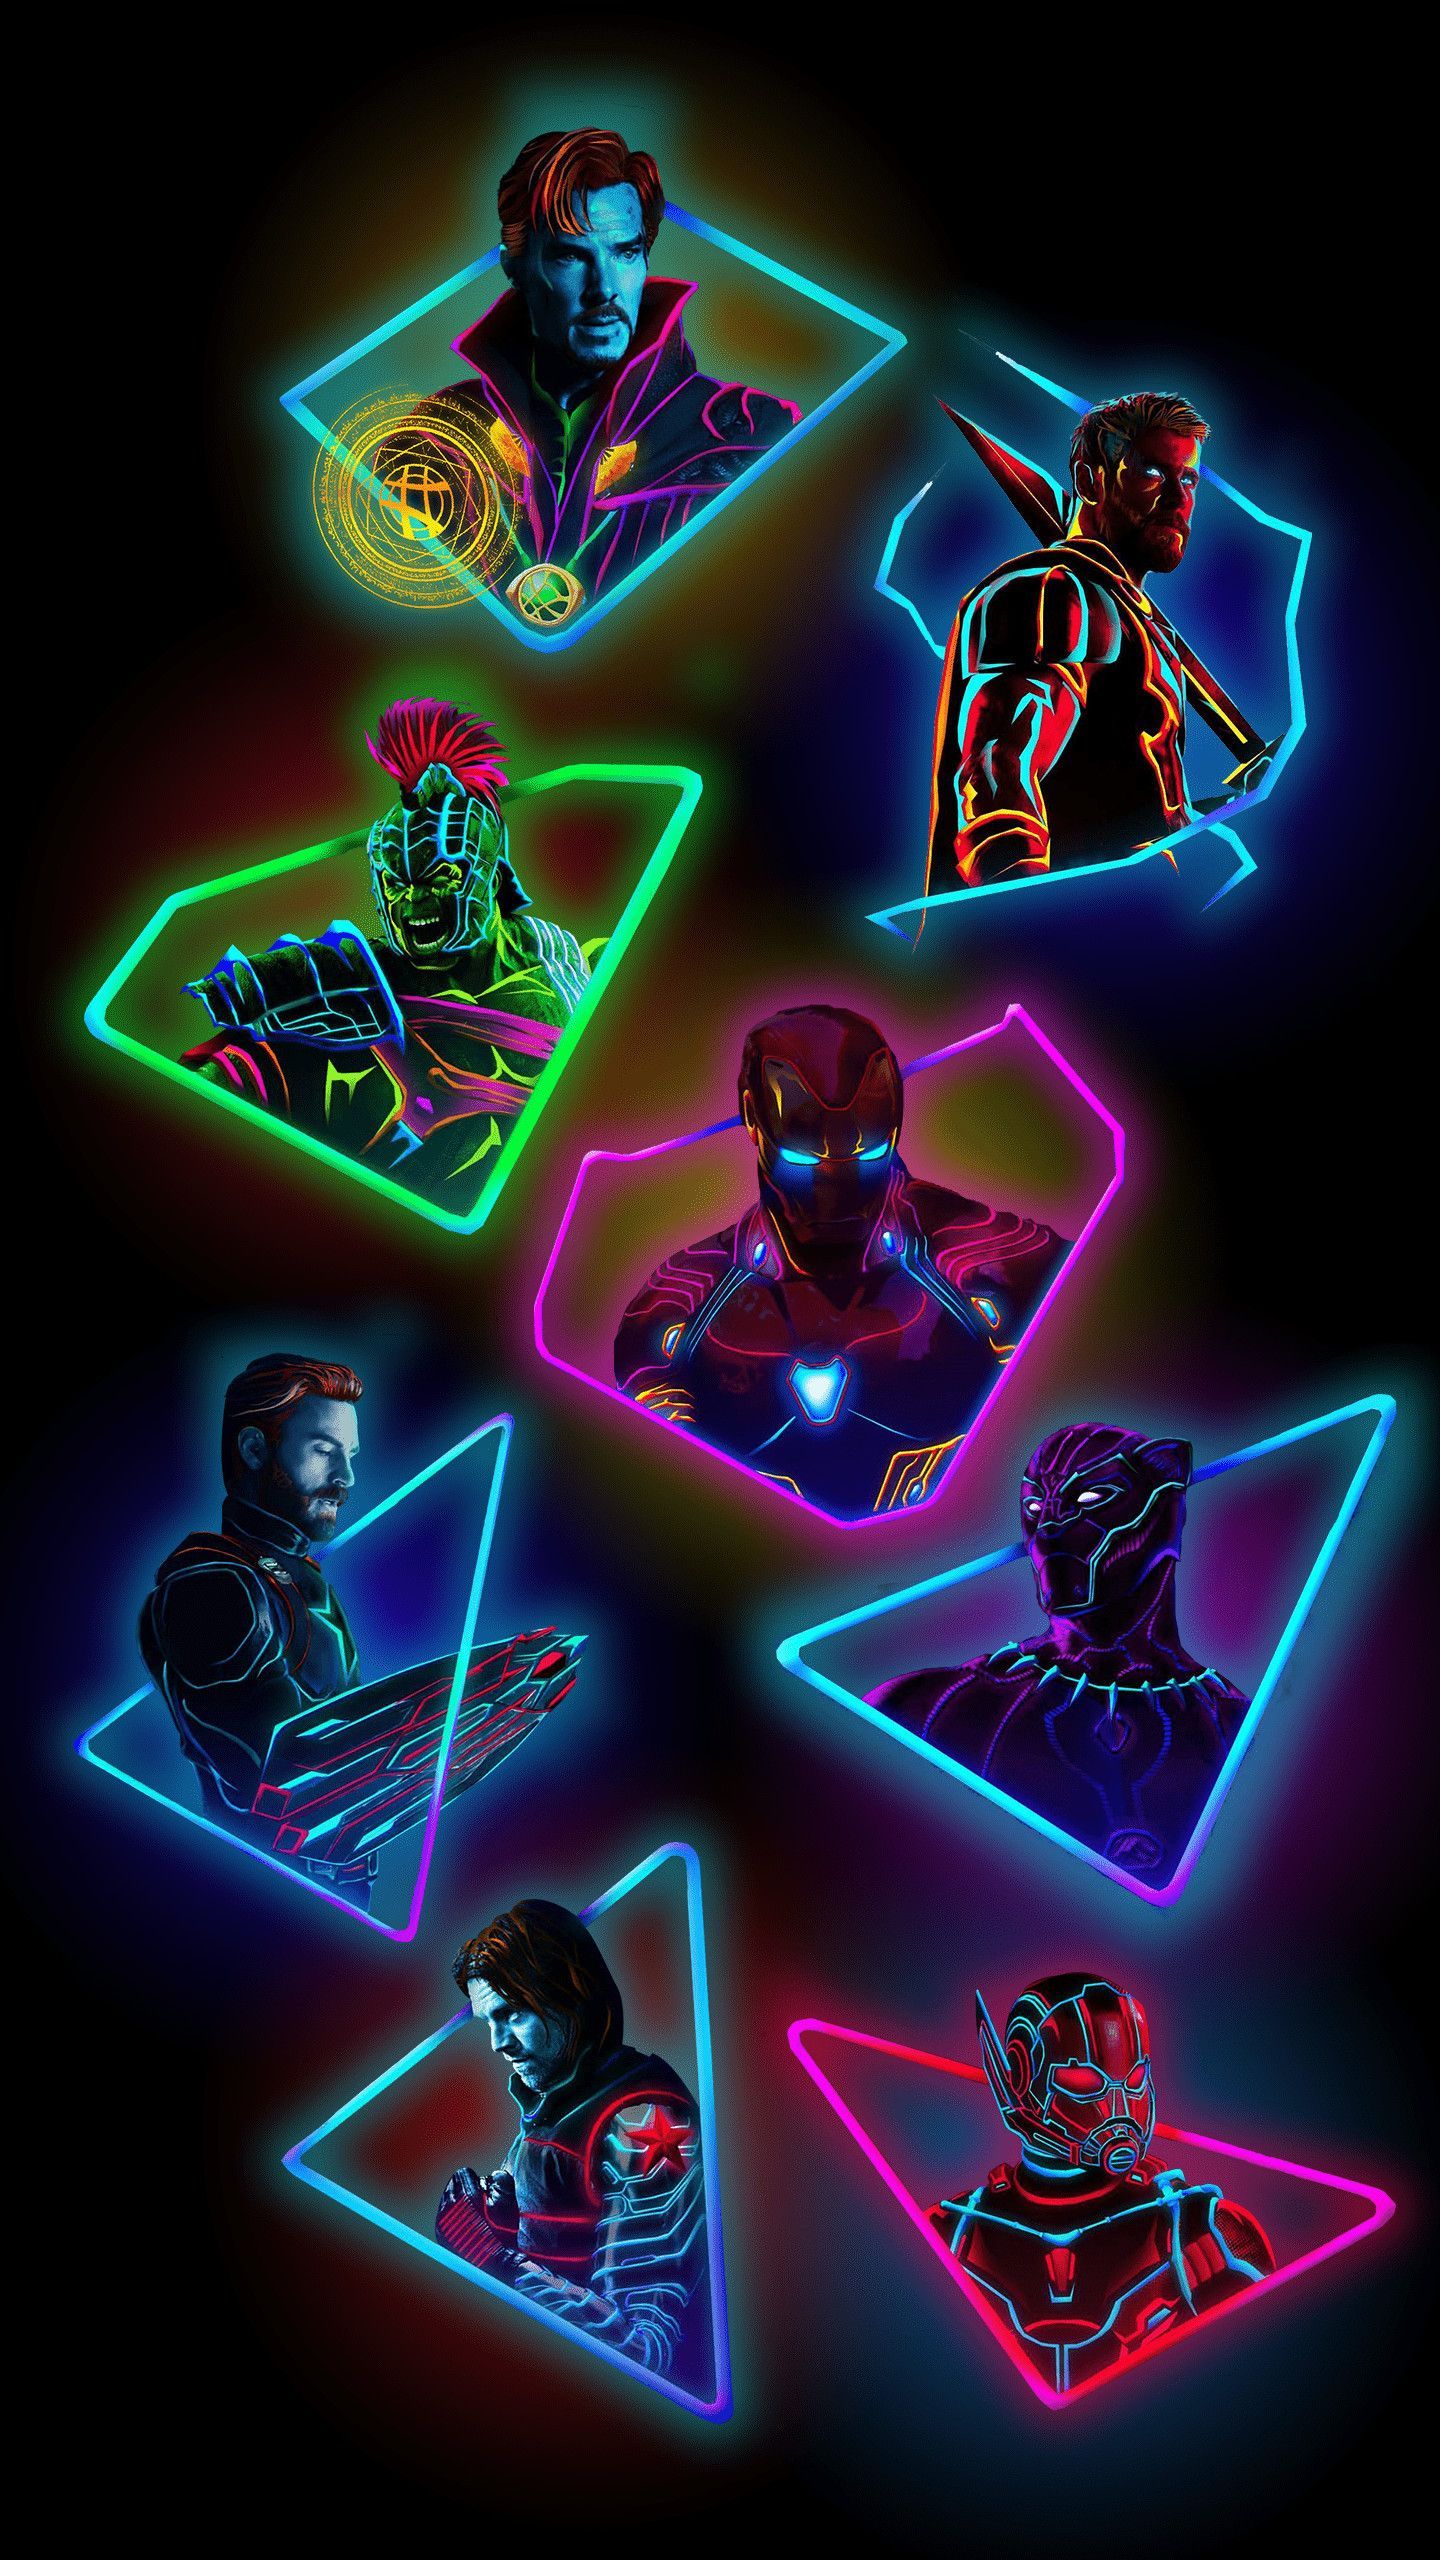 IPhone wallpaper of neon Avengers characters including Iron Man, Captain America, and Black Panther. - Marvel, Avengers